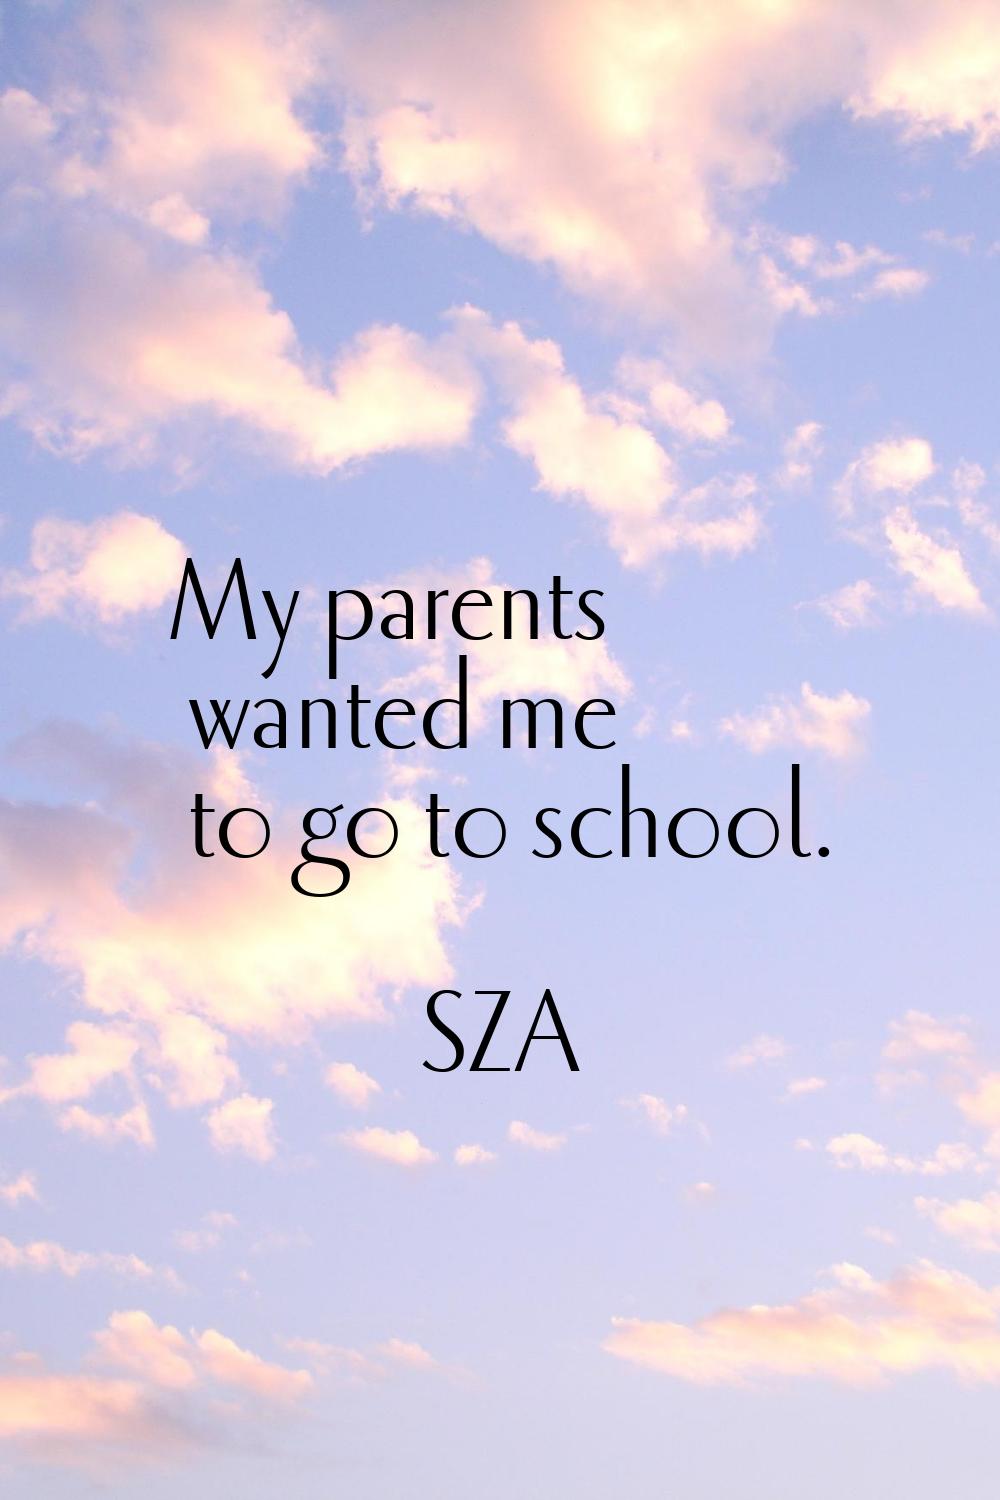 My parents wanted me to go to school.